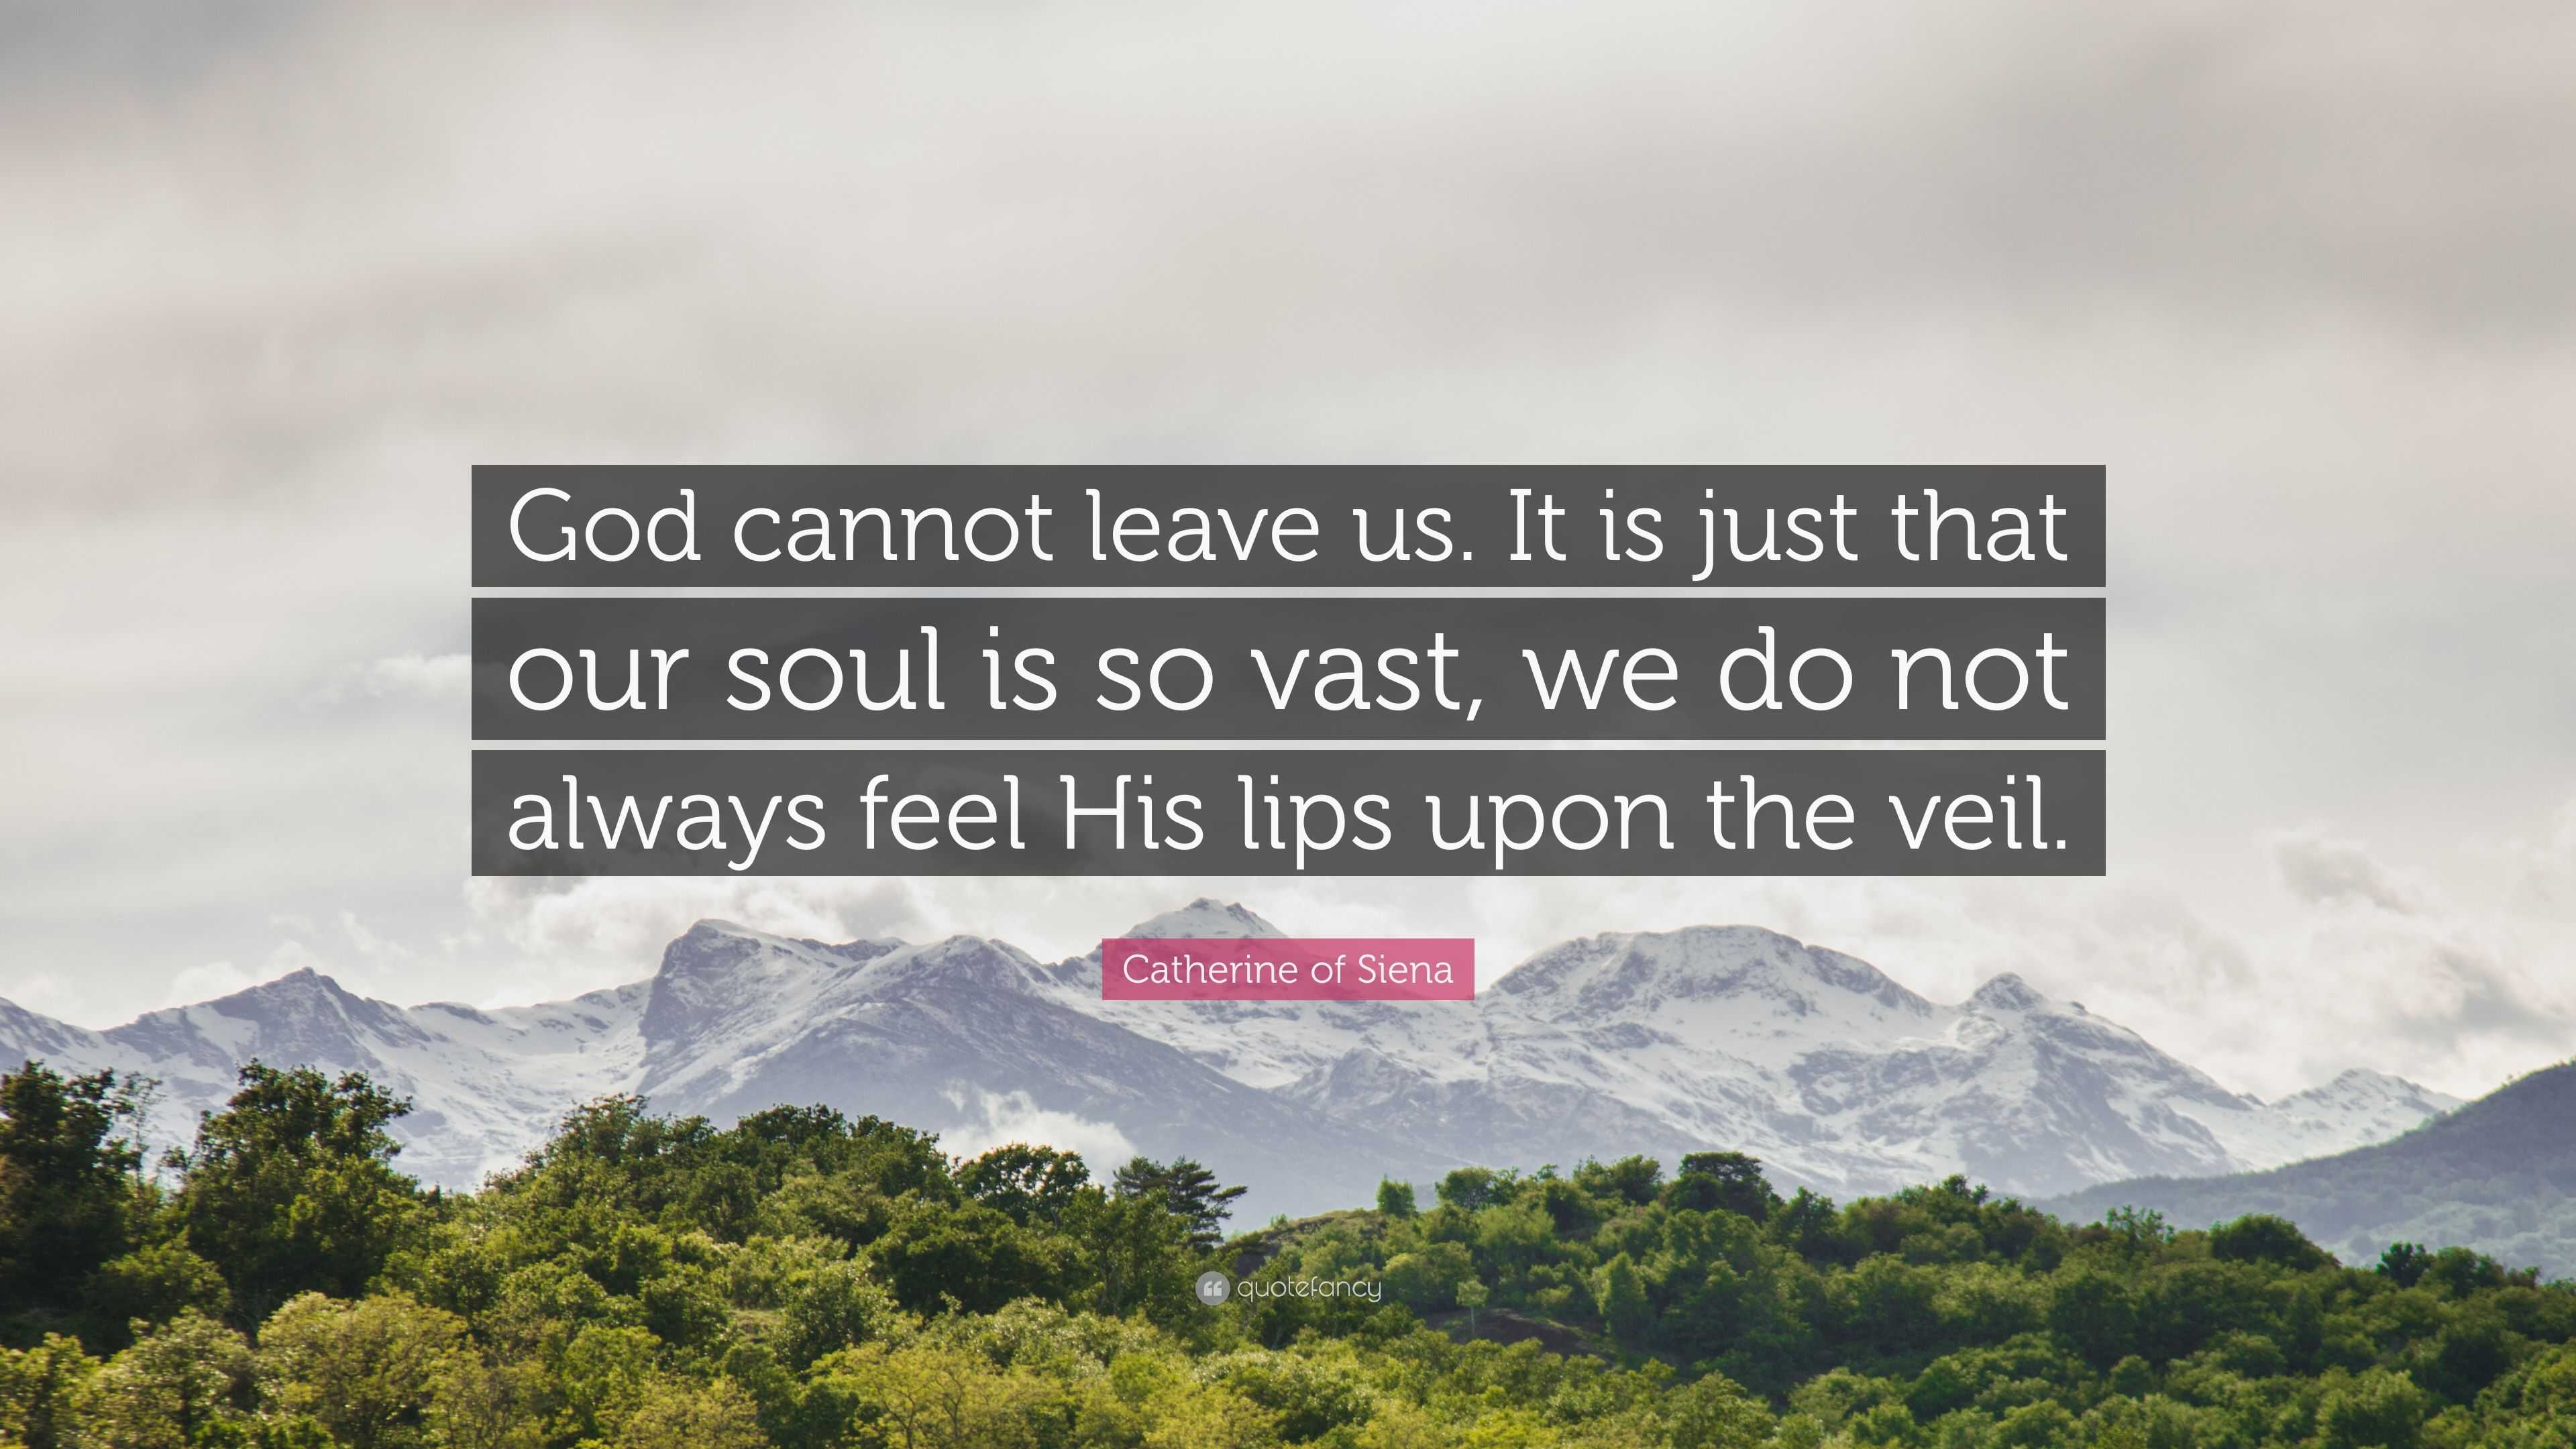 Catherine of Siena Quote: “God cannot leave us. It is just that our soul is  so